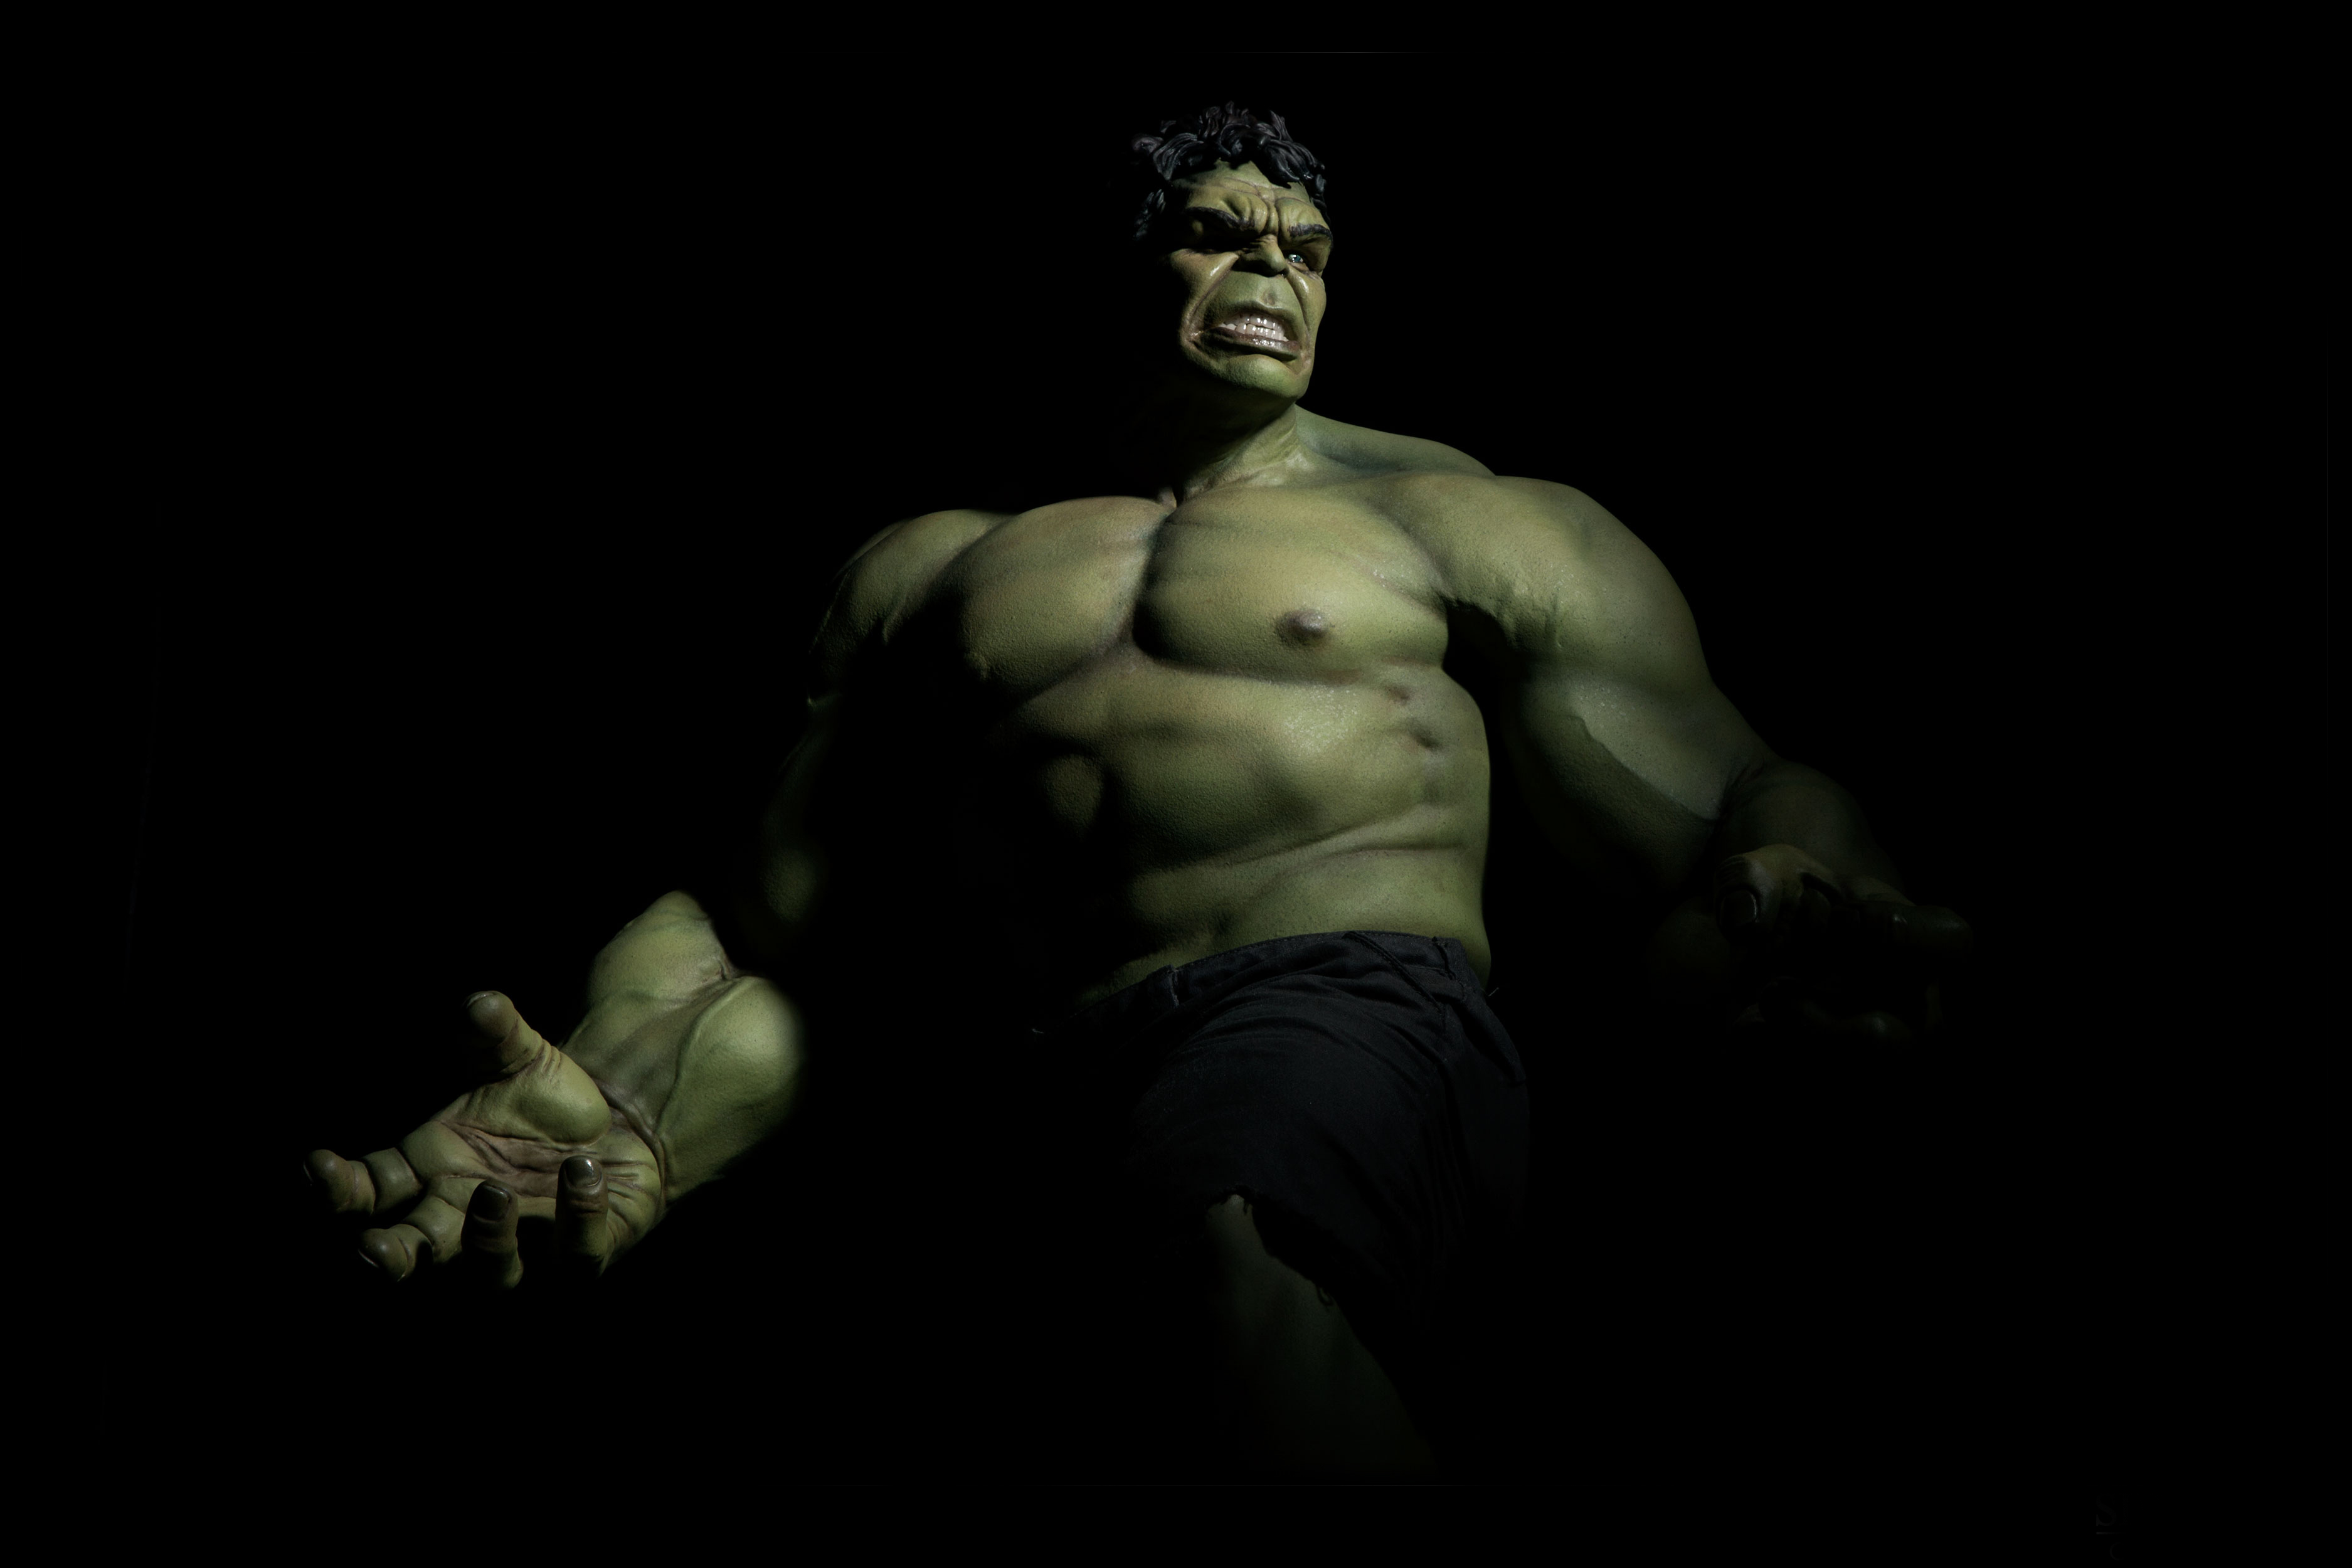 Incredible Hulk Wallpapers Archives - Page 11 of 13 ...